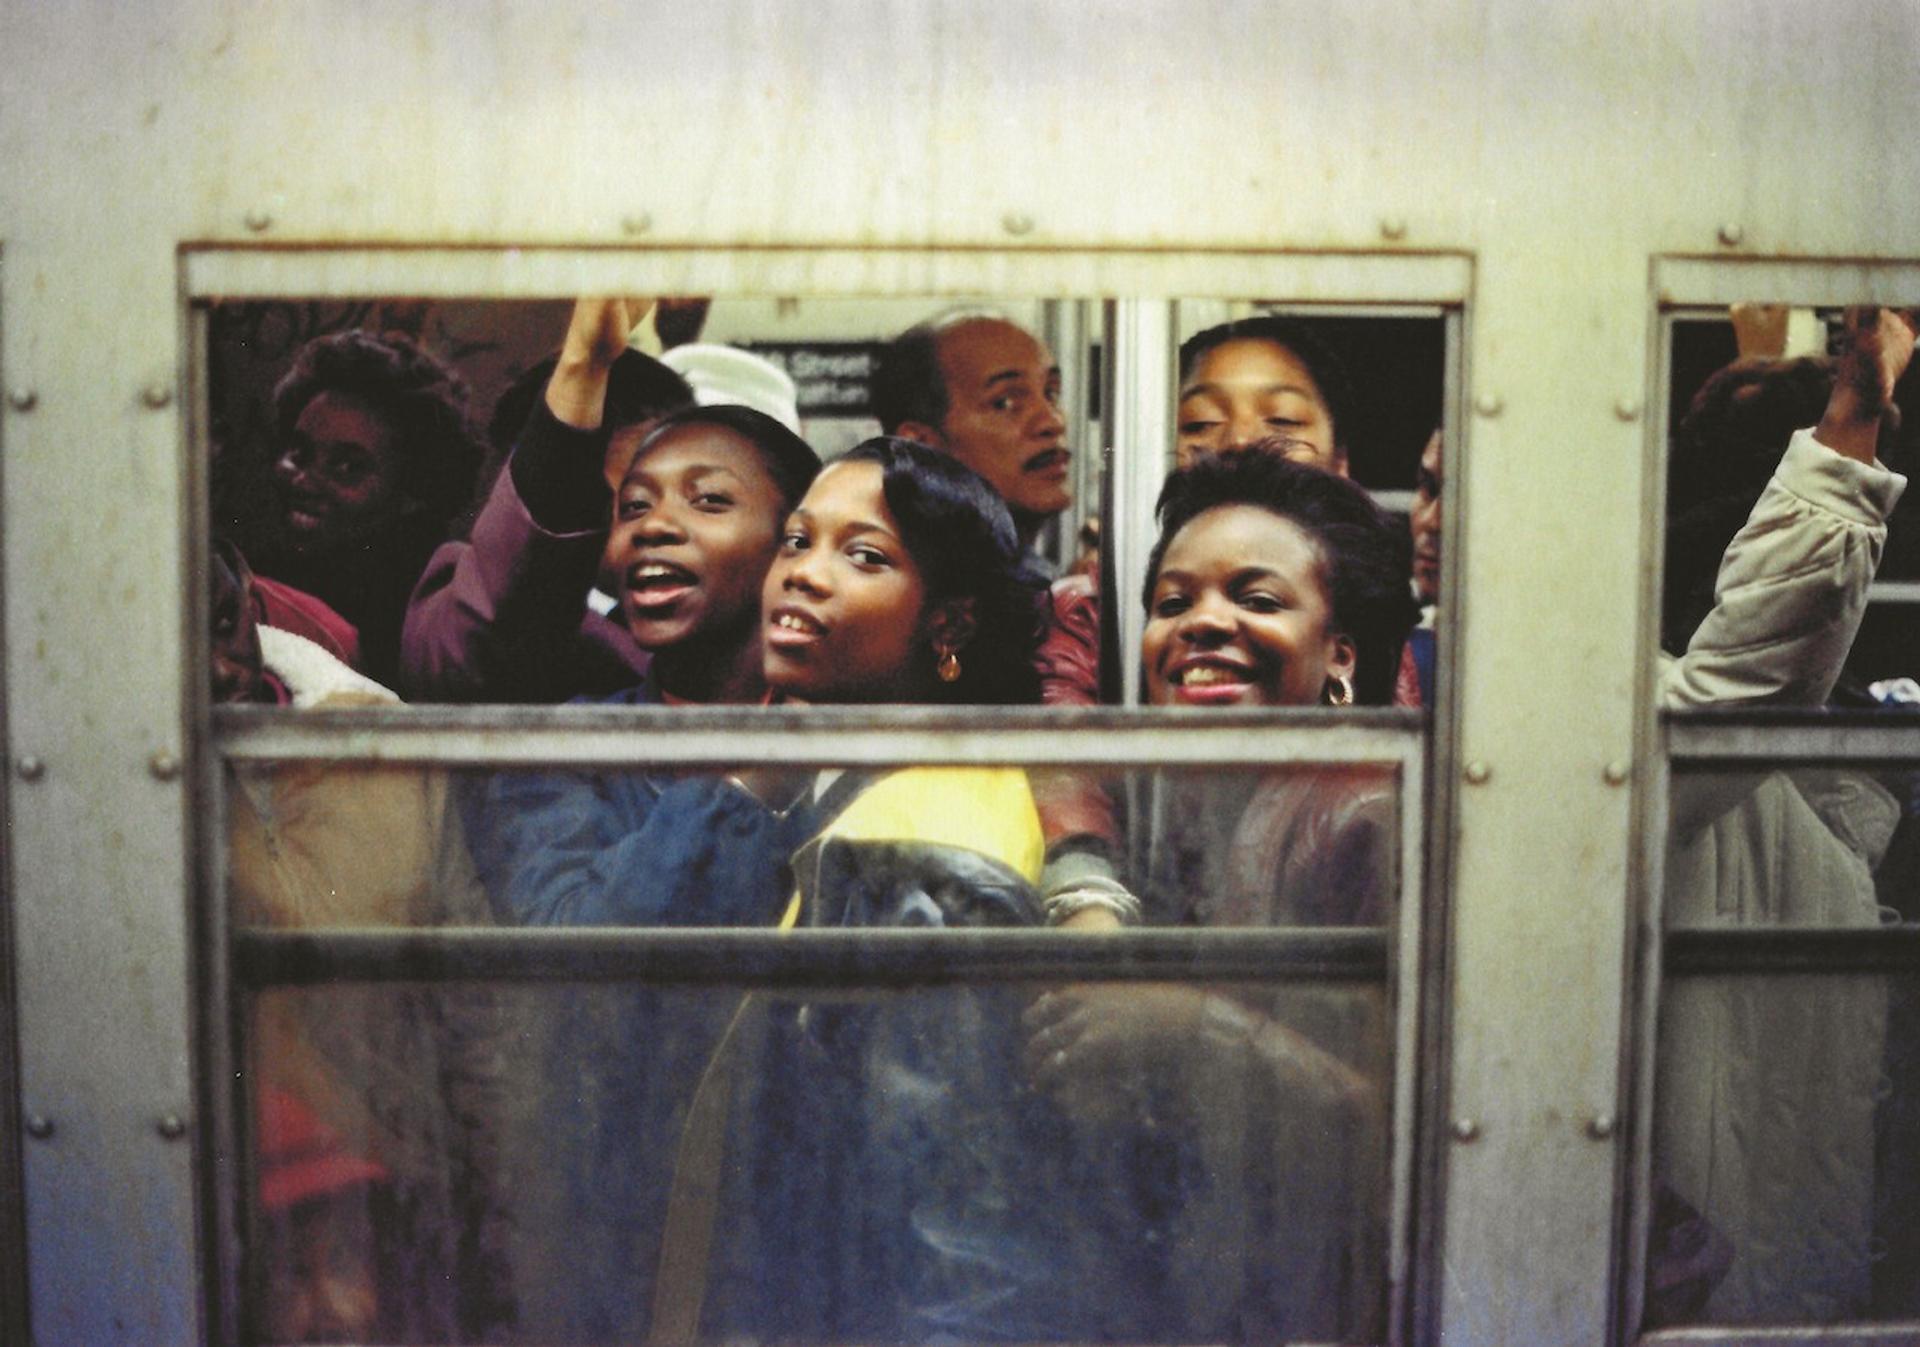 Jamel Shabazz, Rush Hour, Brooklyn, NY. 1980. Collection of the Bronx Museum of the Arts.